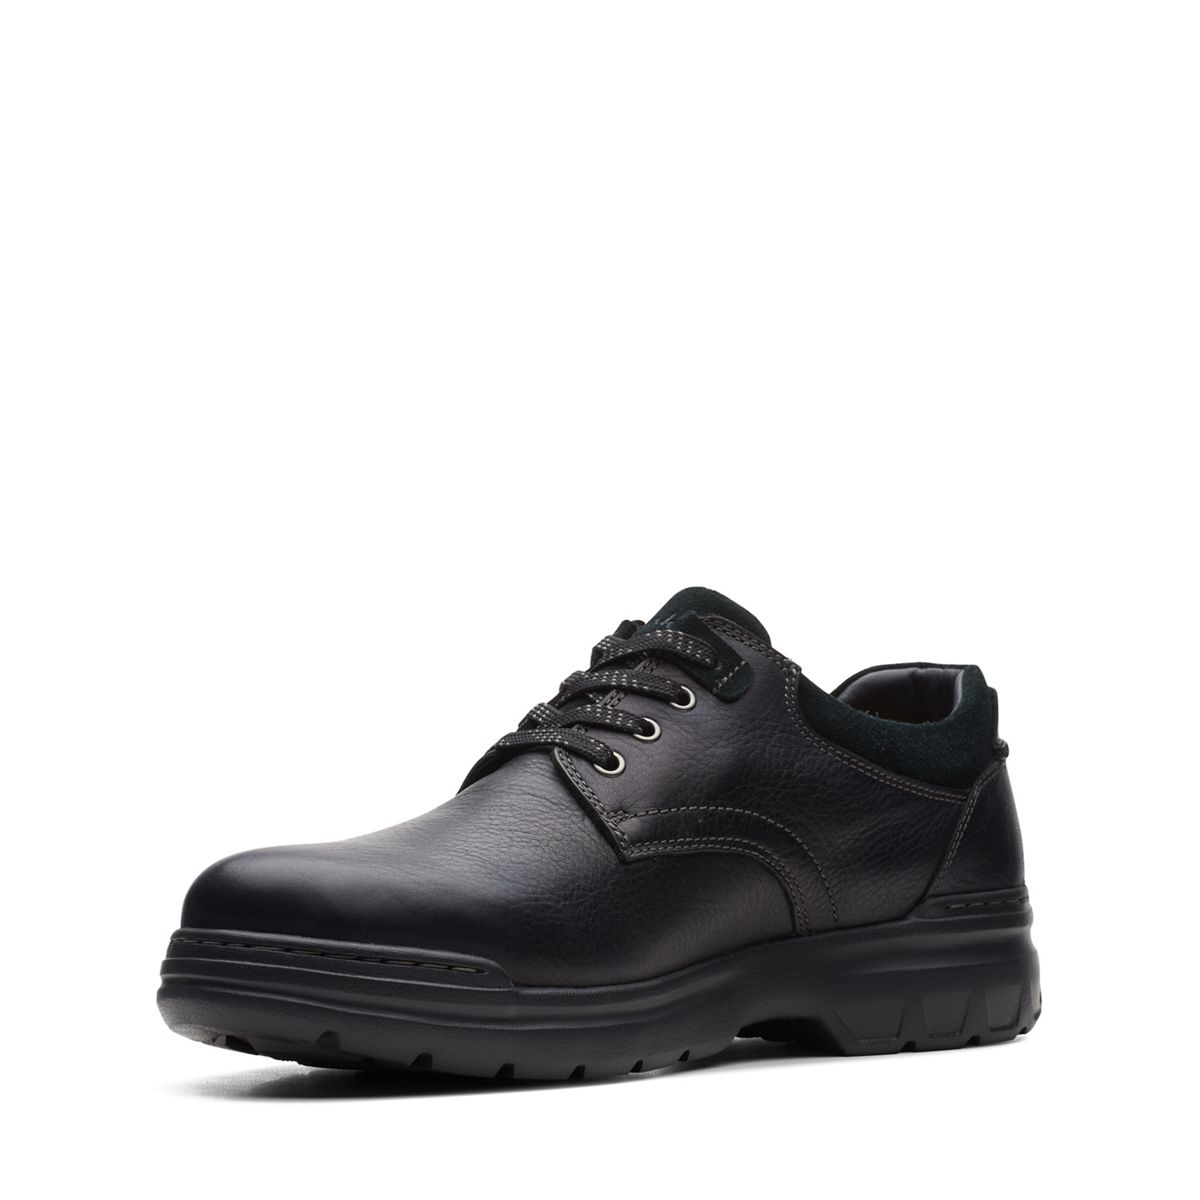 Rockie 2 Lo Gore-Tex Black Leather - Clarks Canada Official Site 